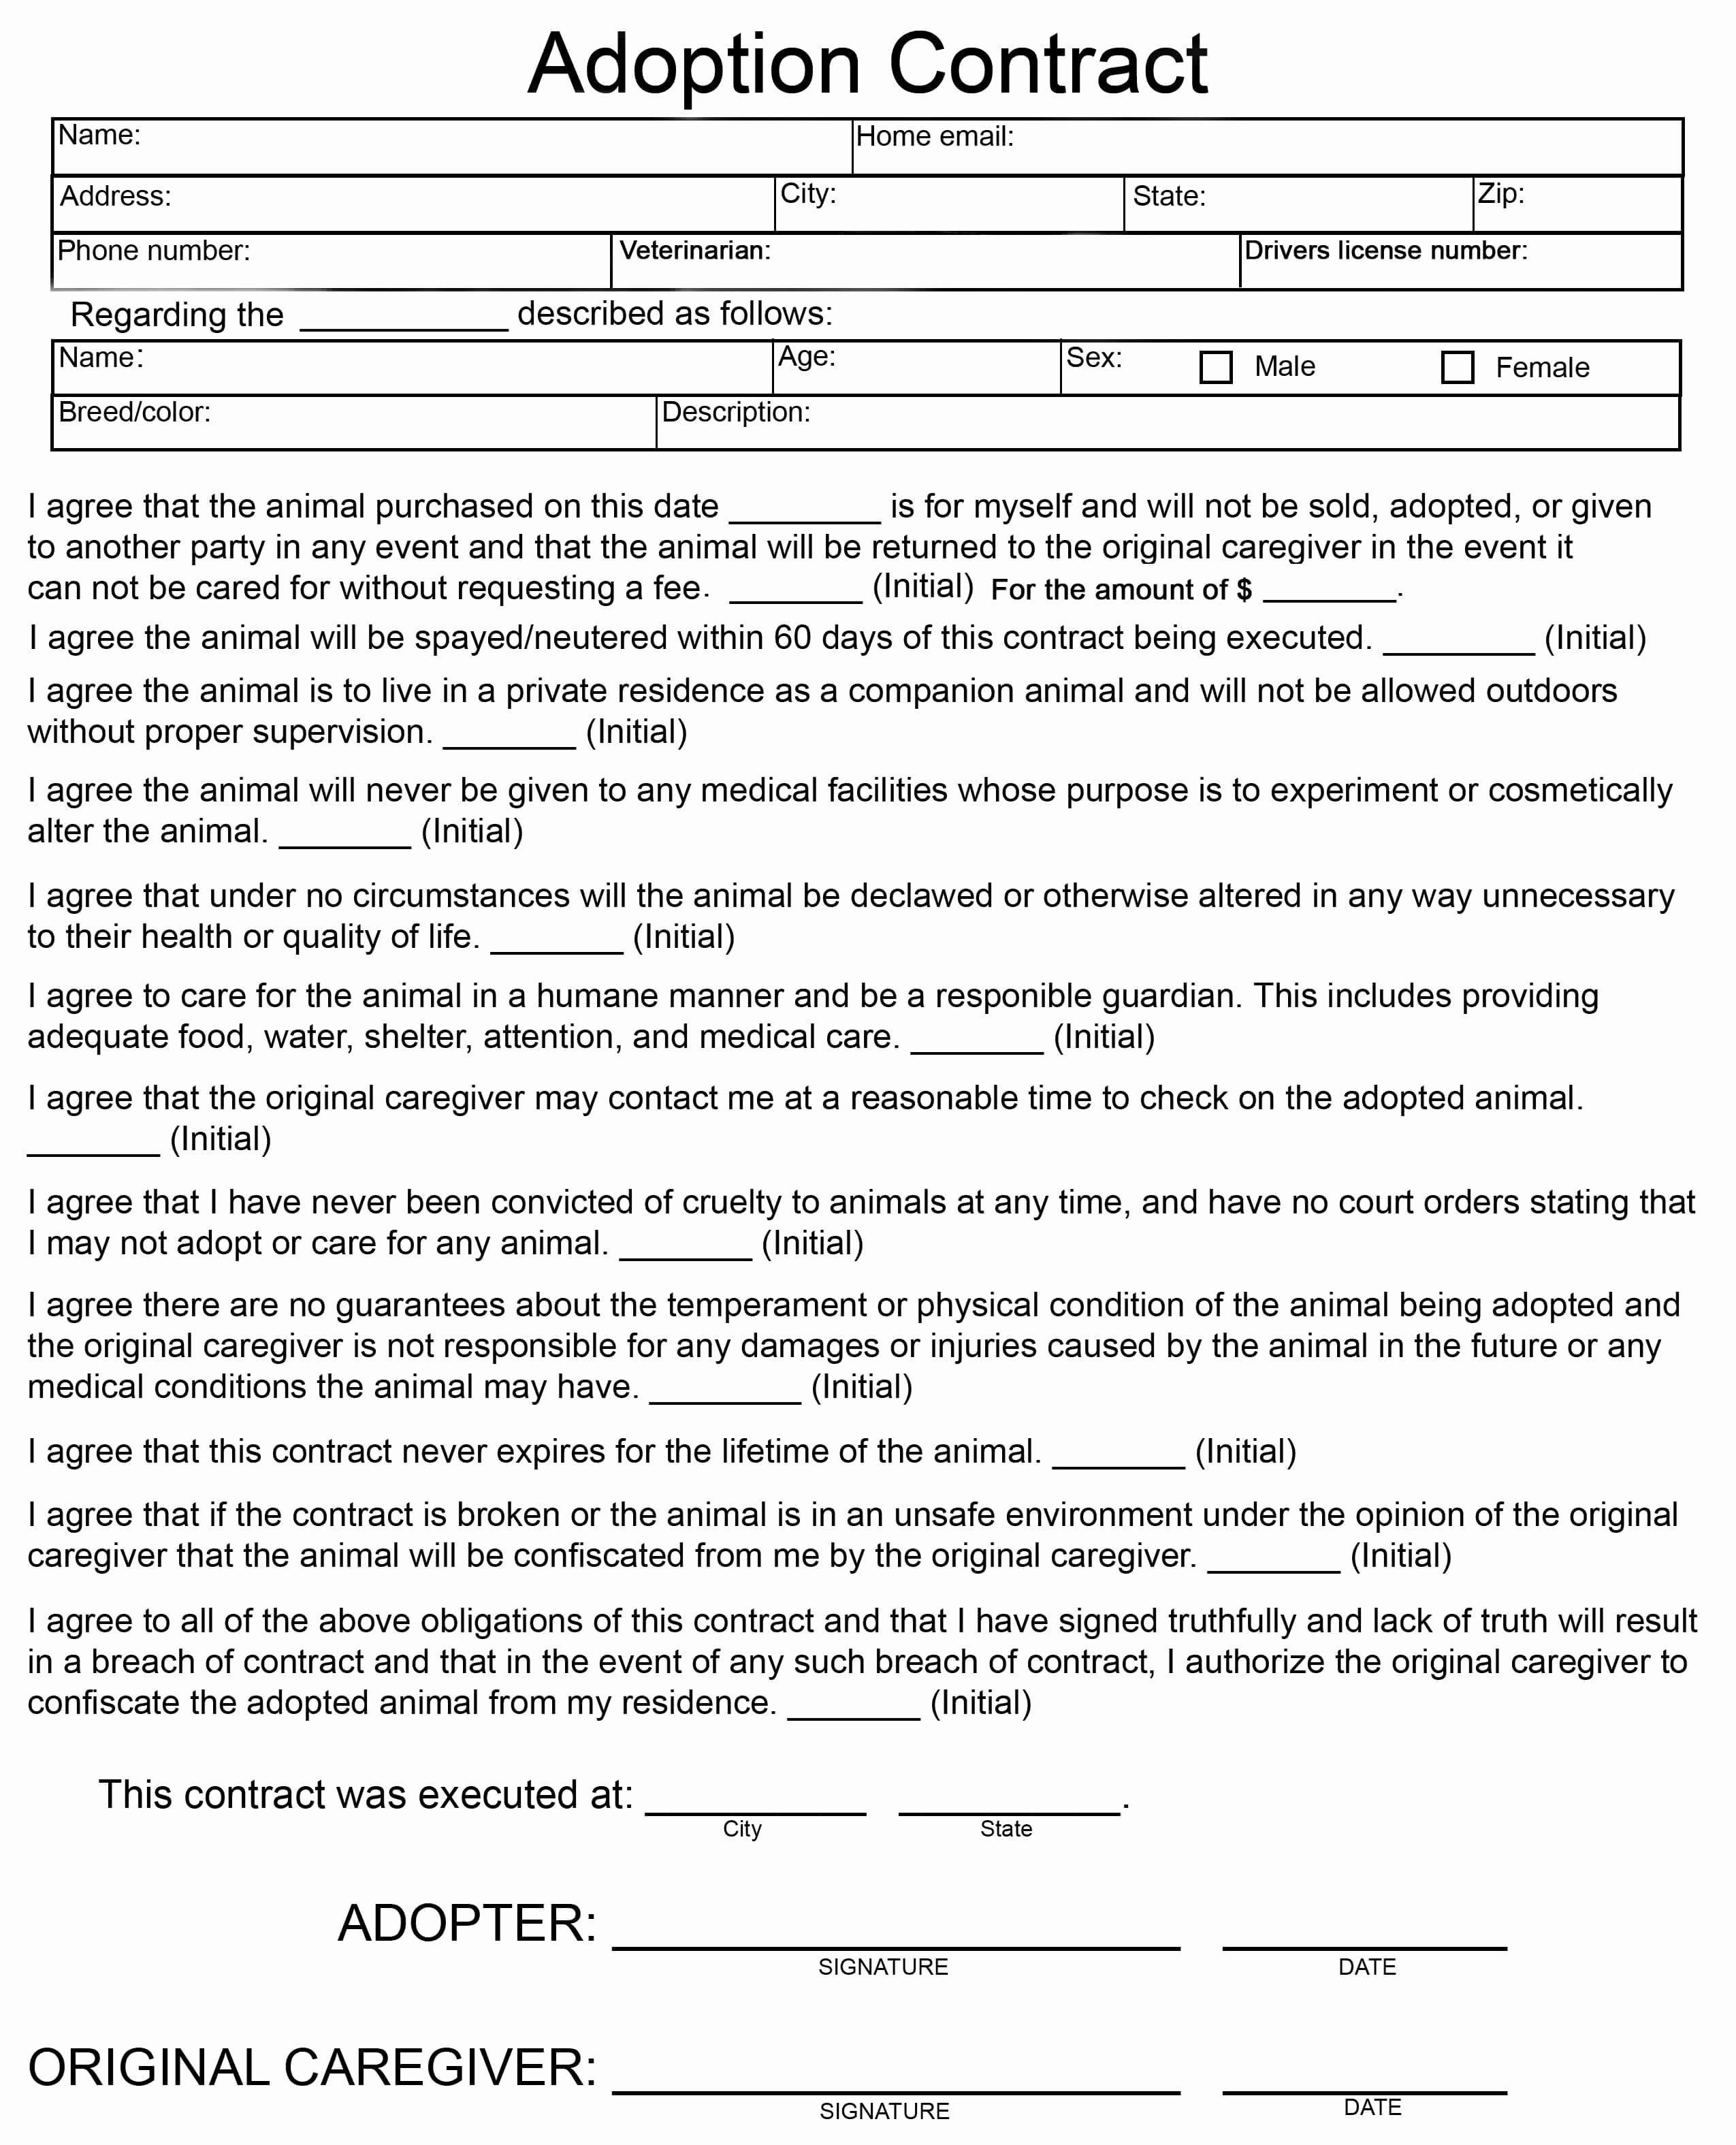 Dog Training Contract Template Lovely Simple Adoption Contract 1 Animal Rescue Professionals